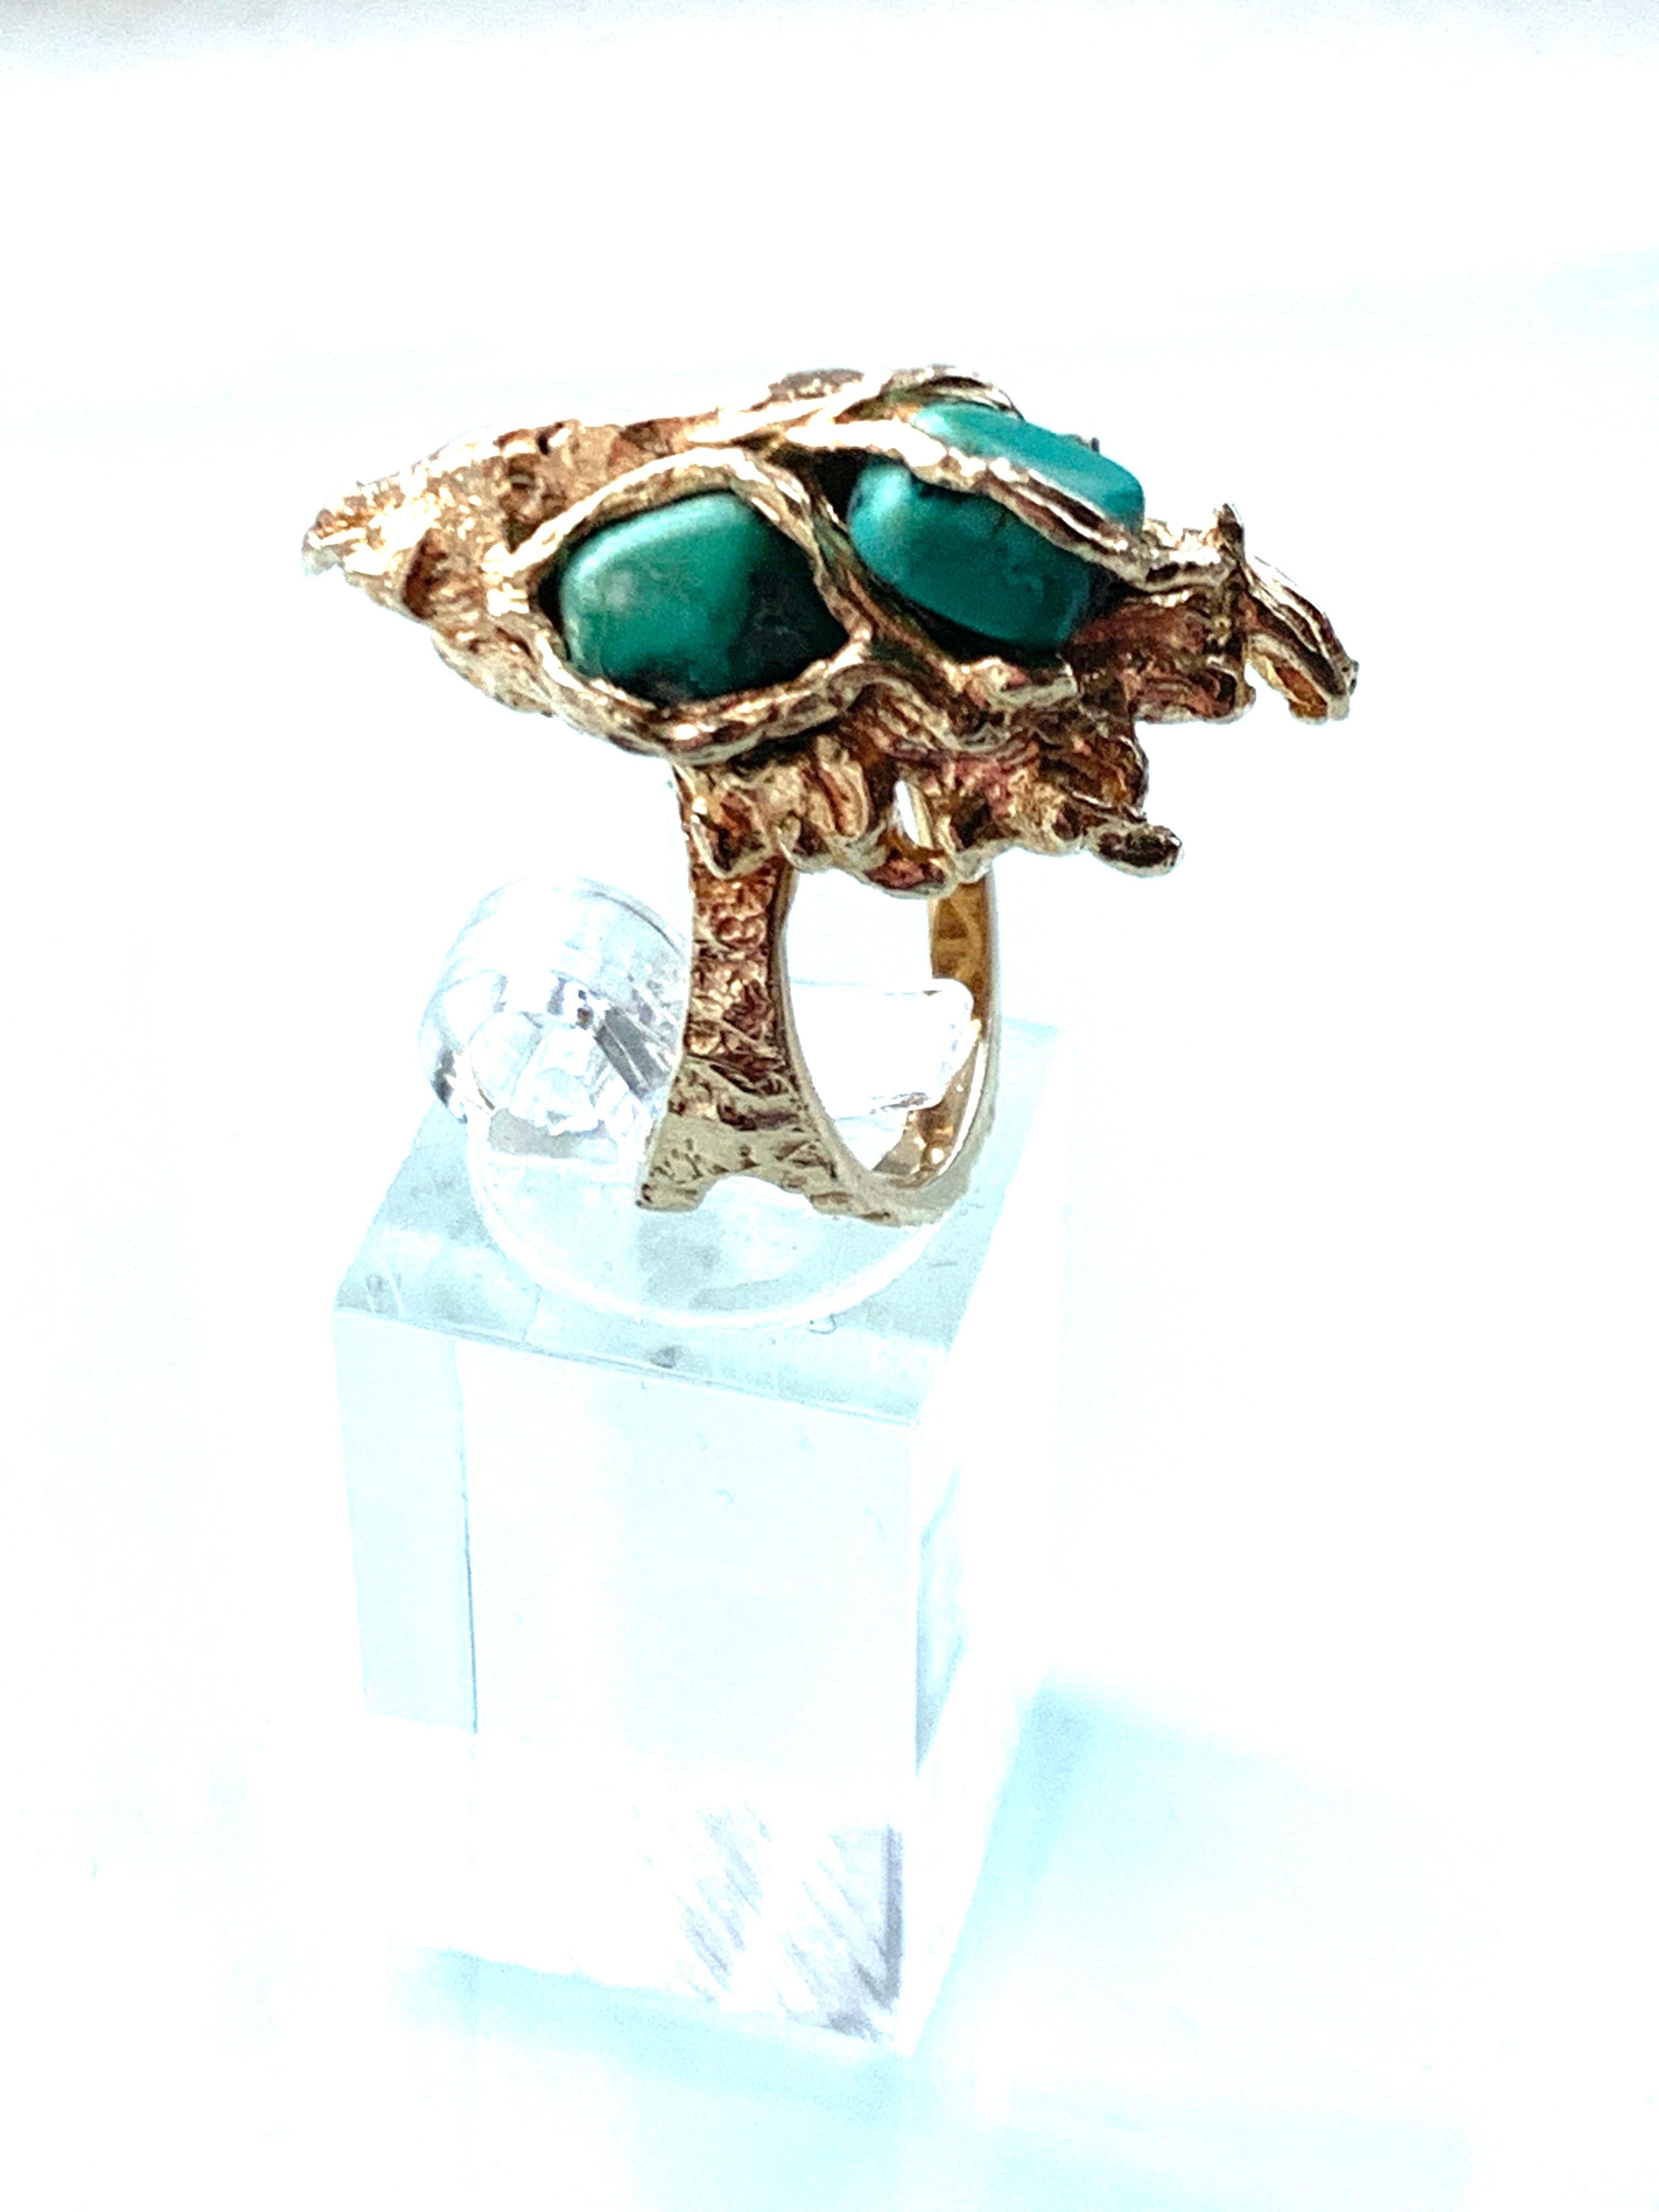 Avant Garde 9ct Gold & Turquoise Brutalist Ring
Natural Turquoise Stones 
Very Large Statement Piece from late Twentieth Century
Assay marks - Birmingham England , 1970 .375
Makers LJI
Natural Turquoise stones & 9ct Gold 
Actual inside bank diameter